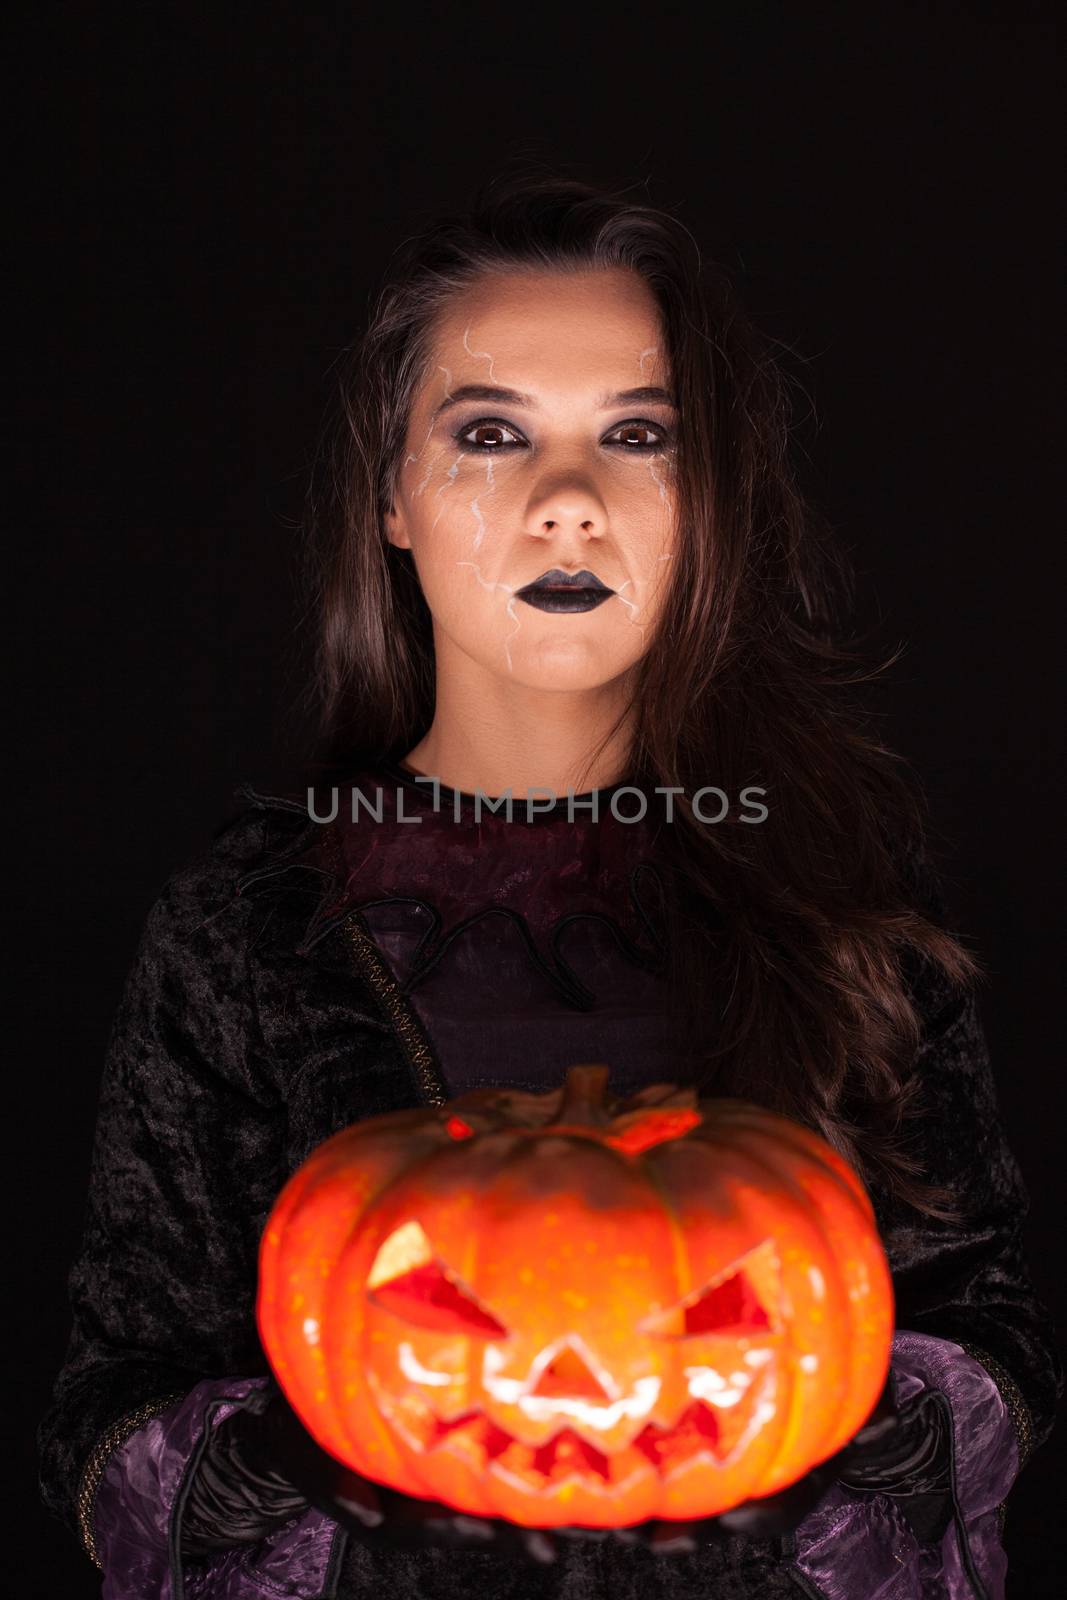 Attractive woman with a serious face dressed up like a witch holding a pumpkin over black background.